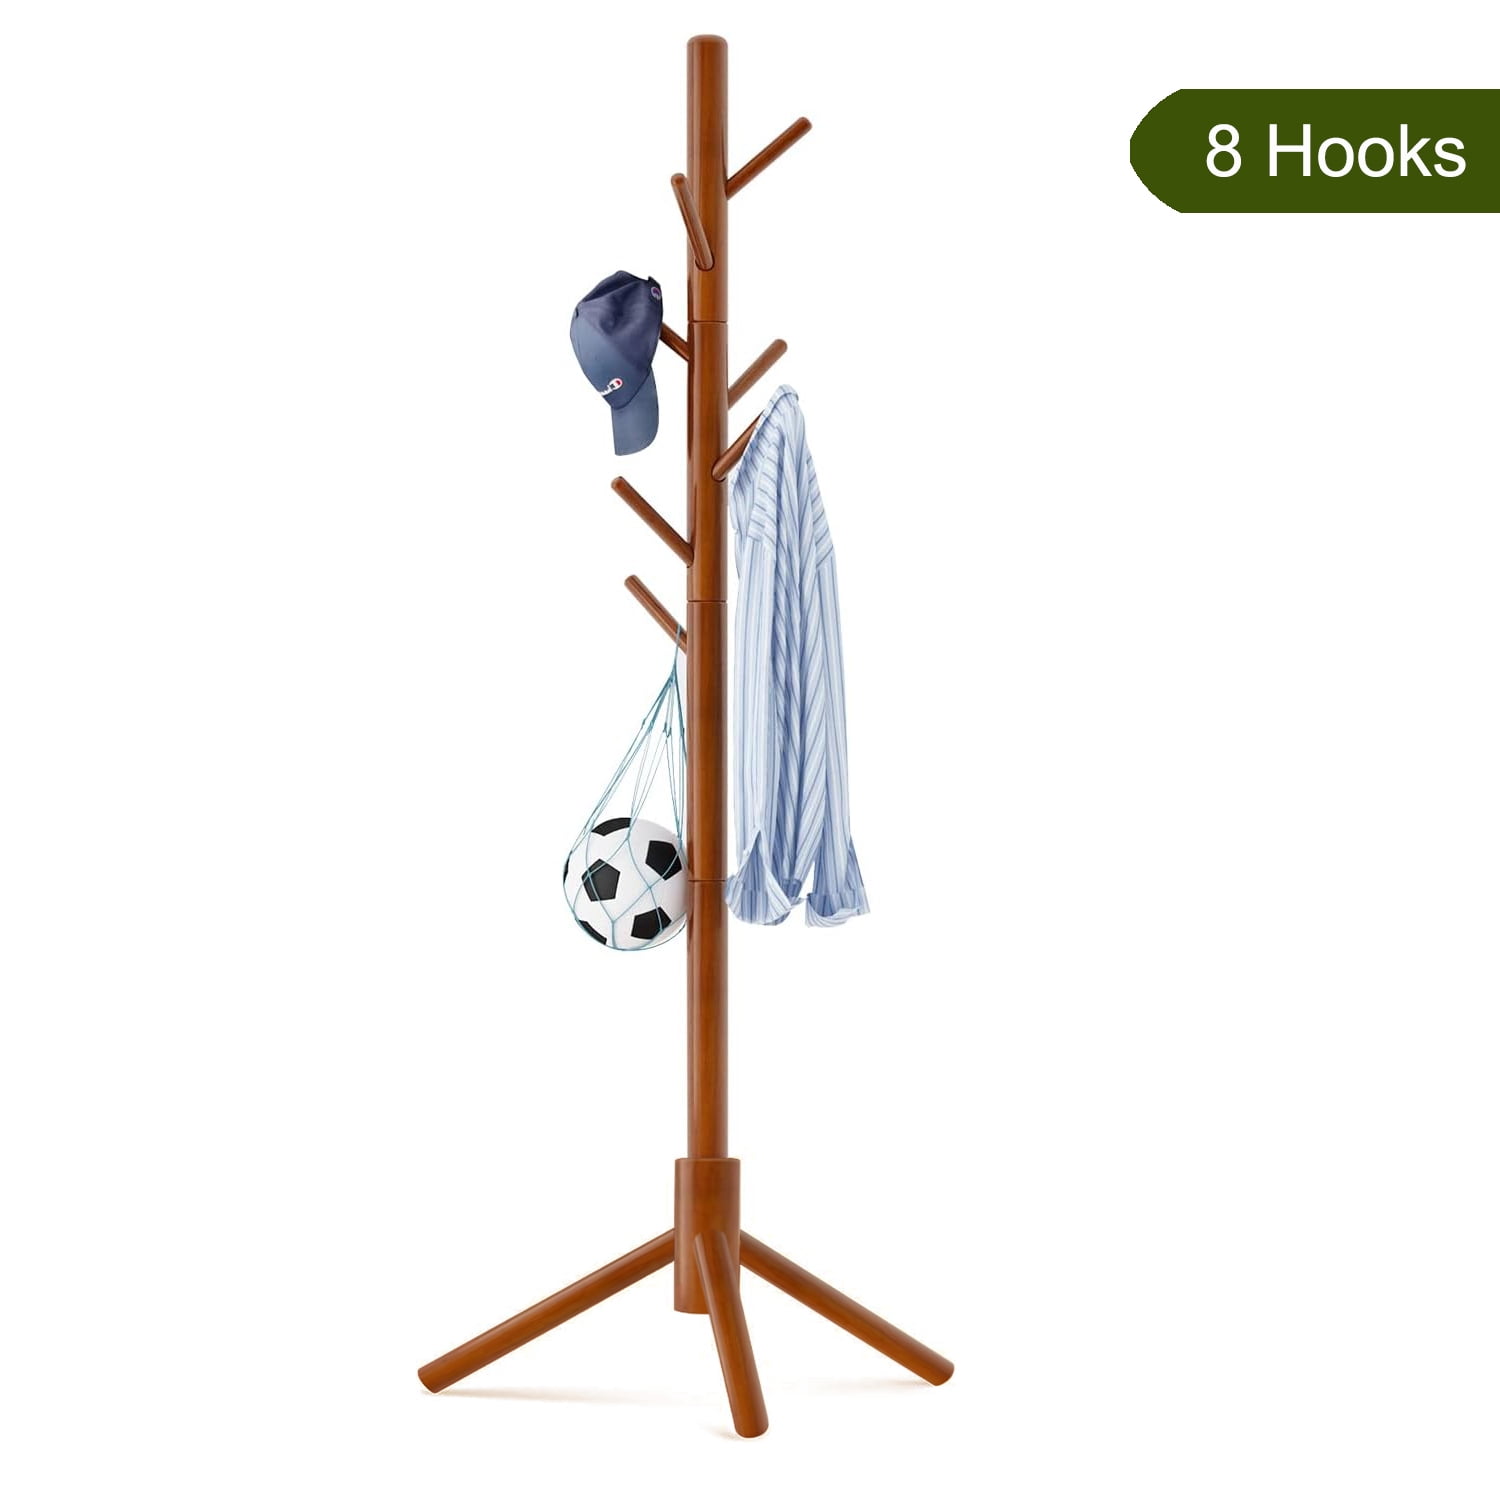 Coat Rack Stand Hat Stand Dinosam Wooden Freestanding Hanger Holder 8 Hooks Sturdy Entryway Hall Tree Clothes Bags Hats Elegant Brown 6fa03f43 2f98 4199 ba7f cef58976b24f.4d717138853081d23f341851ac1a878d